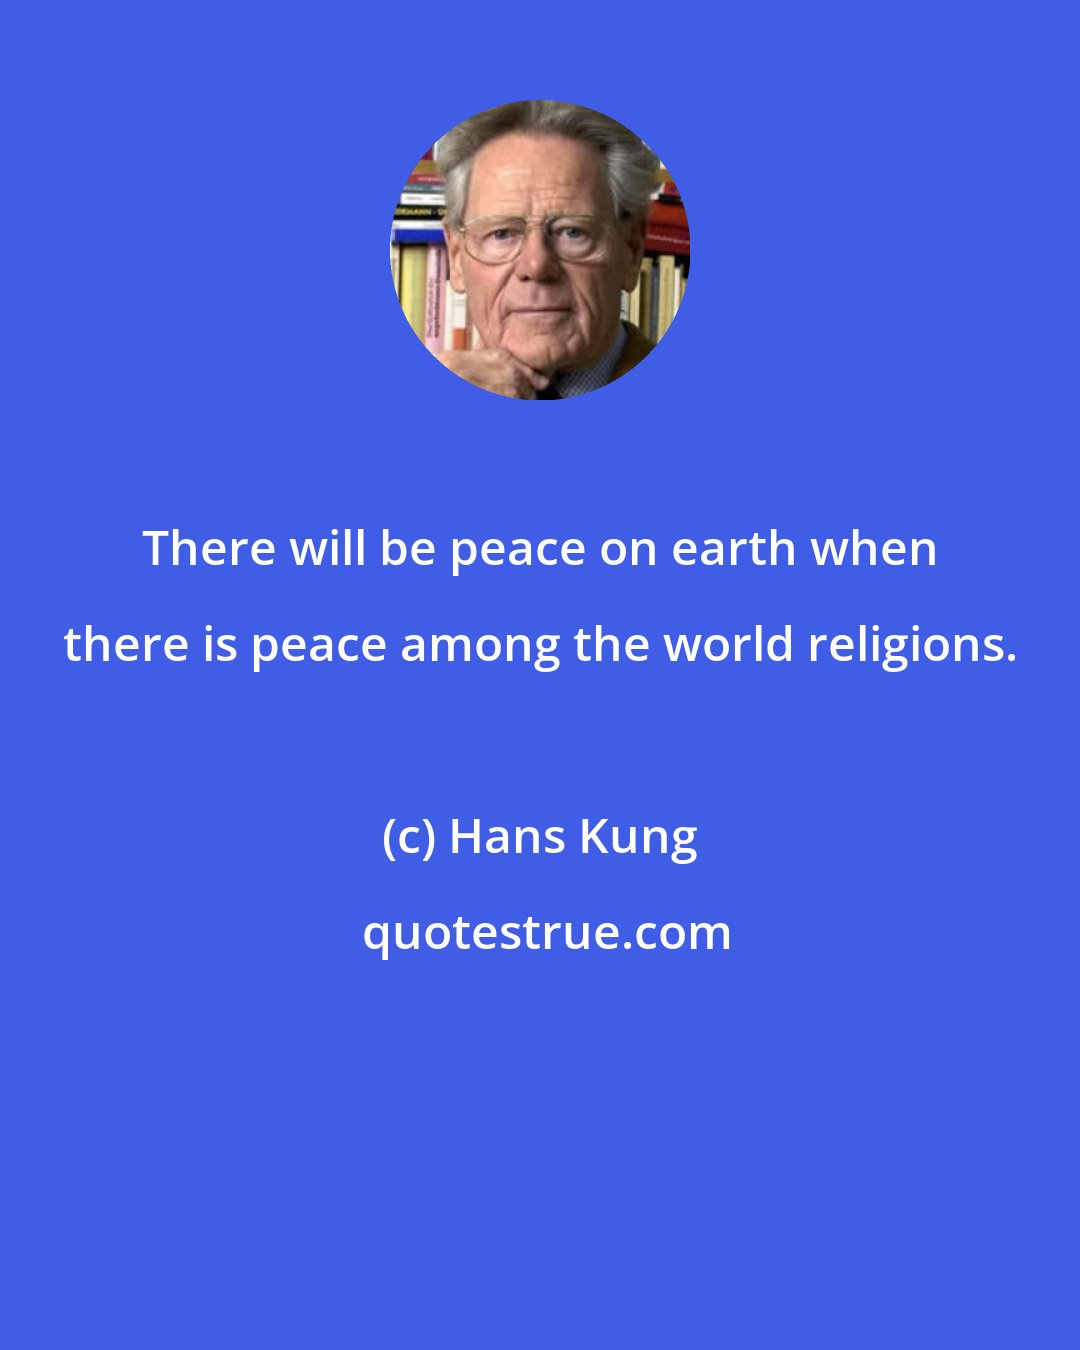 Hans Kung: There will be peace on earth when there is peace among the world religions.